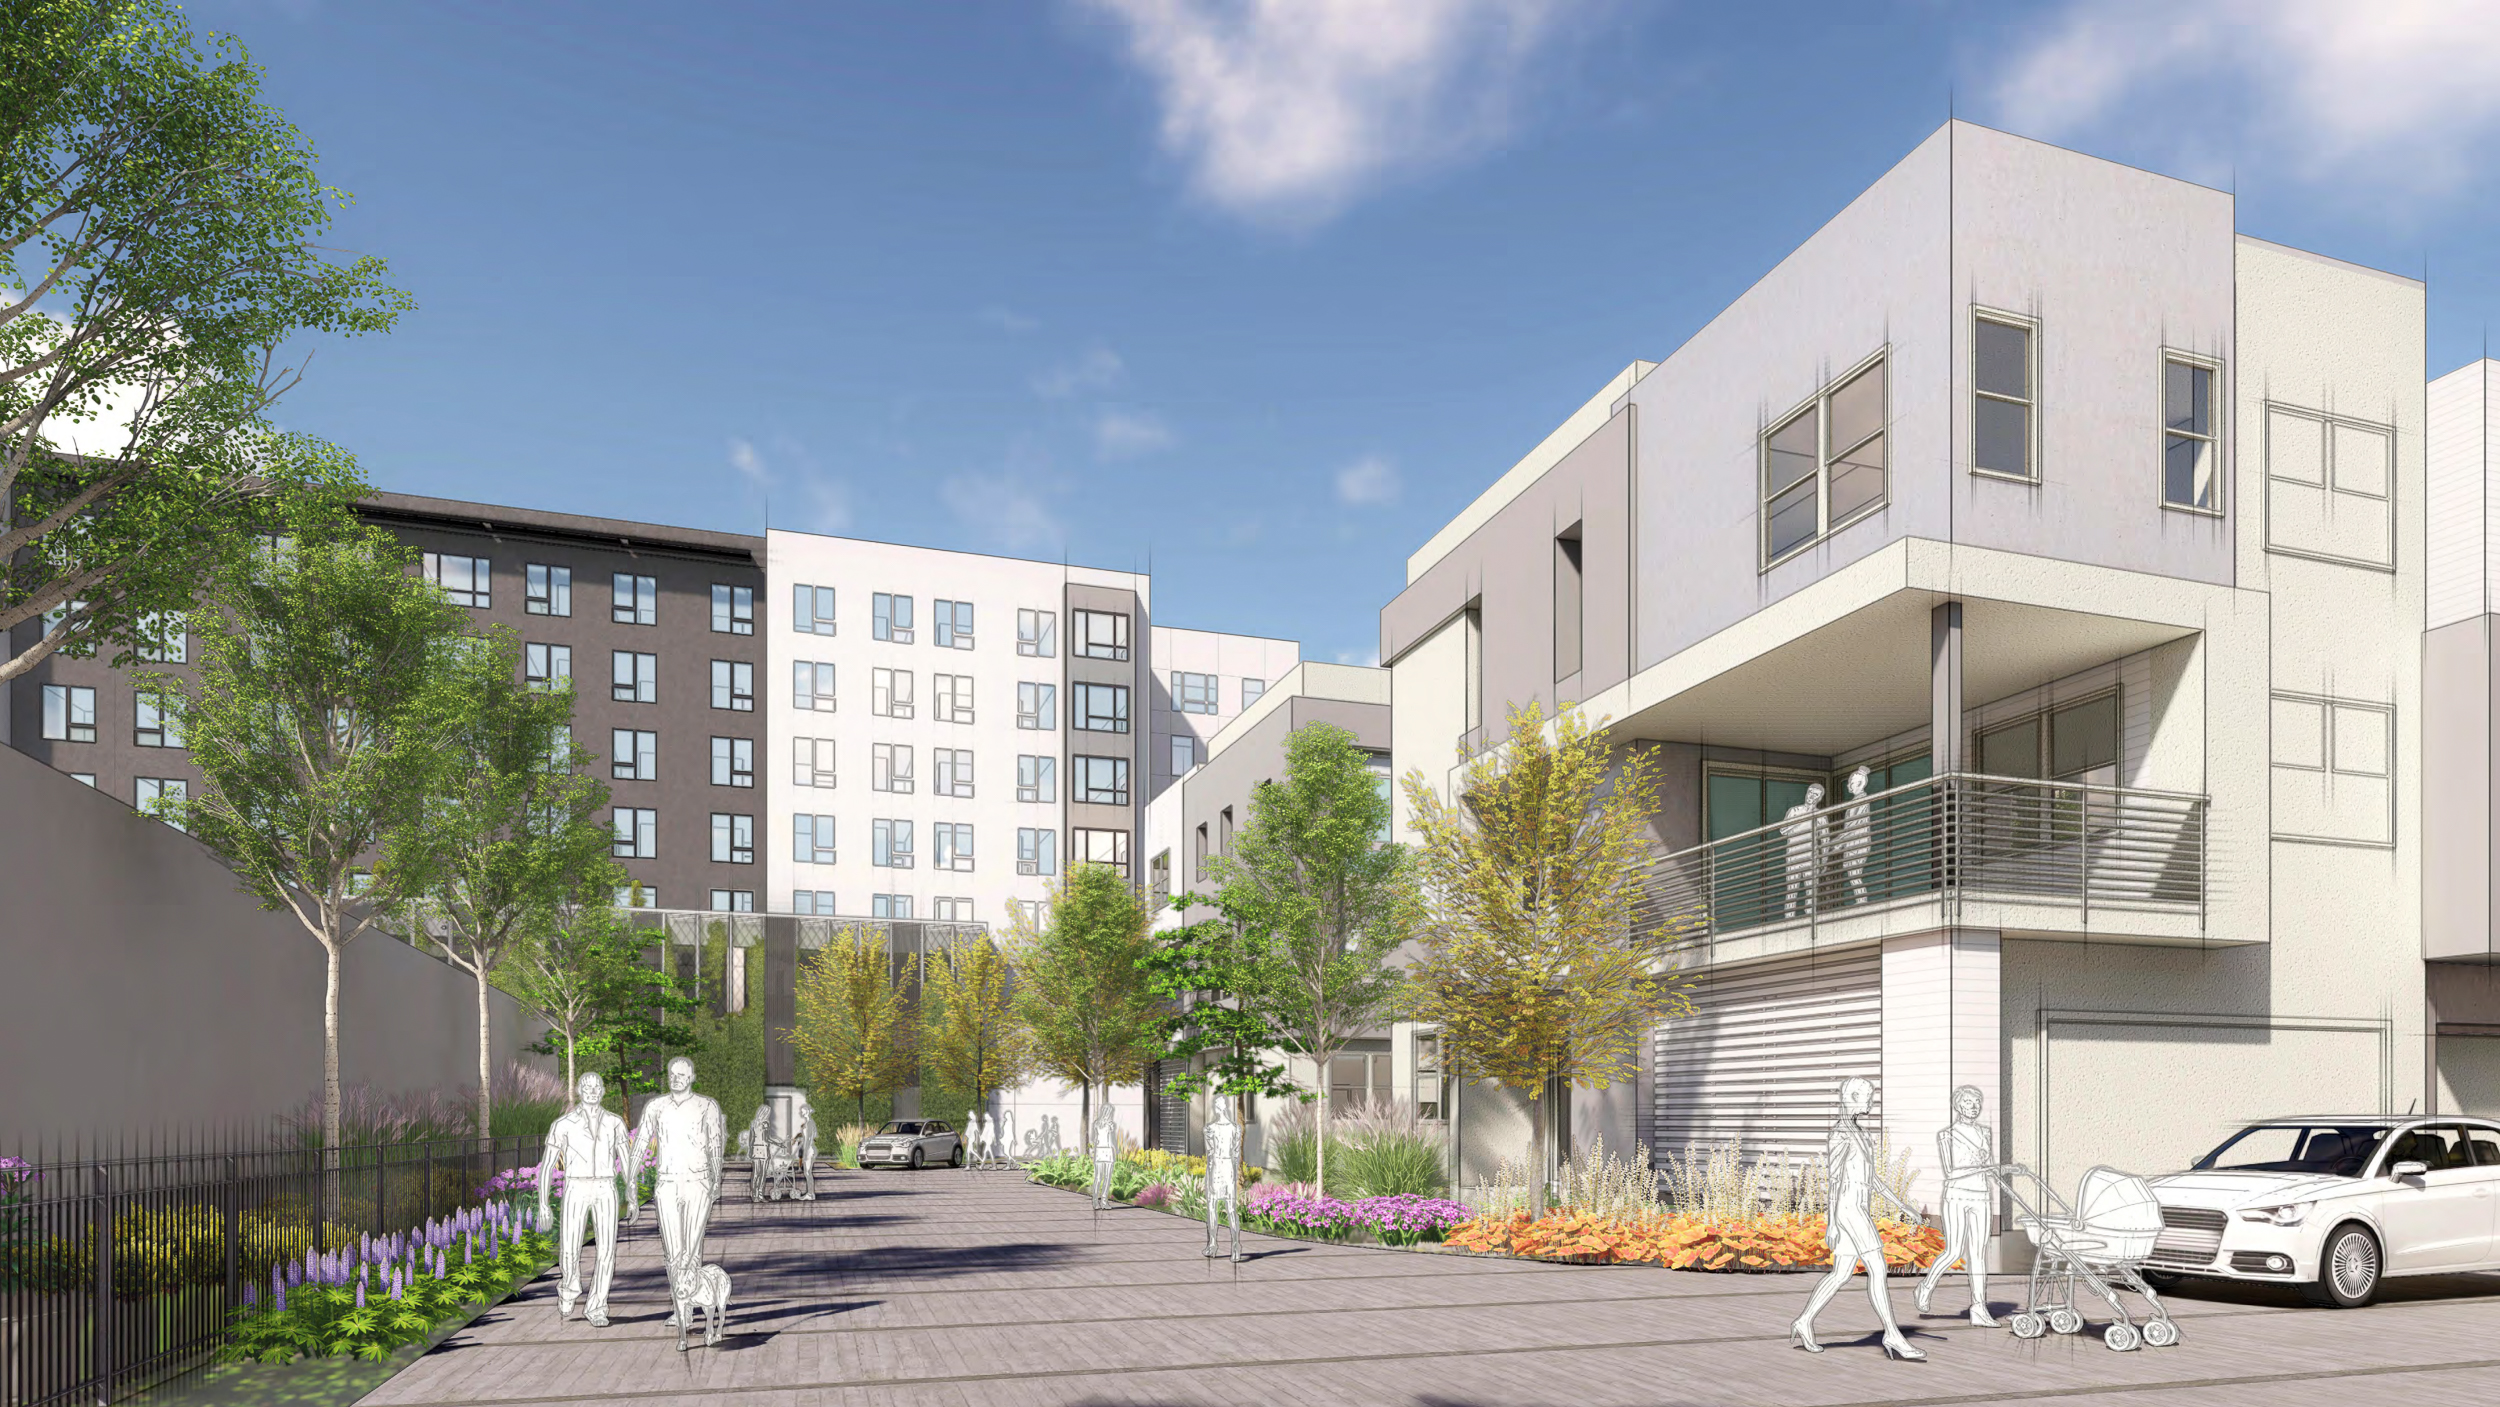 Menlo Flats view from the Meno Uptown townhome site, rendering by Heller Manus Architects, BDE Architecture